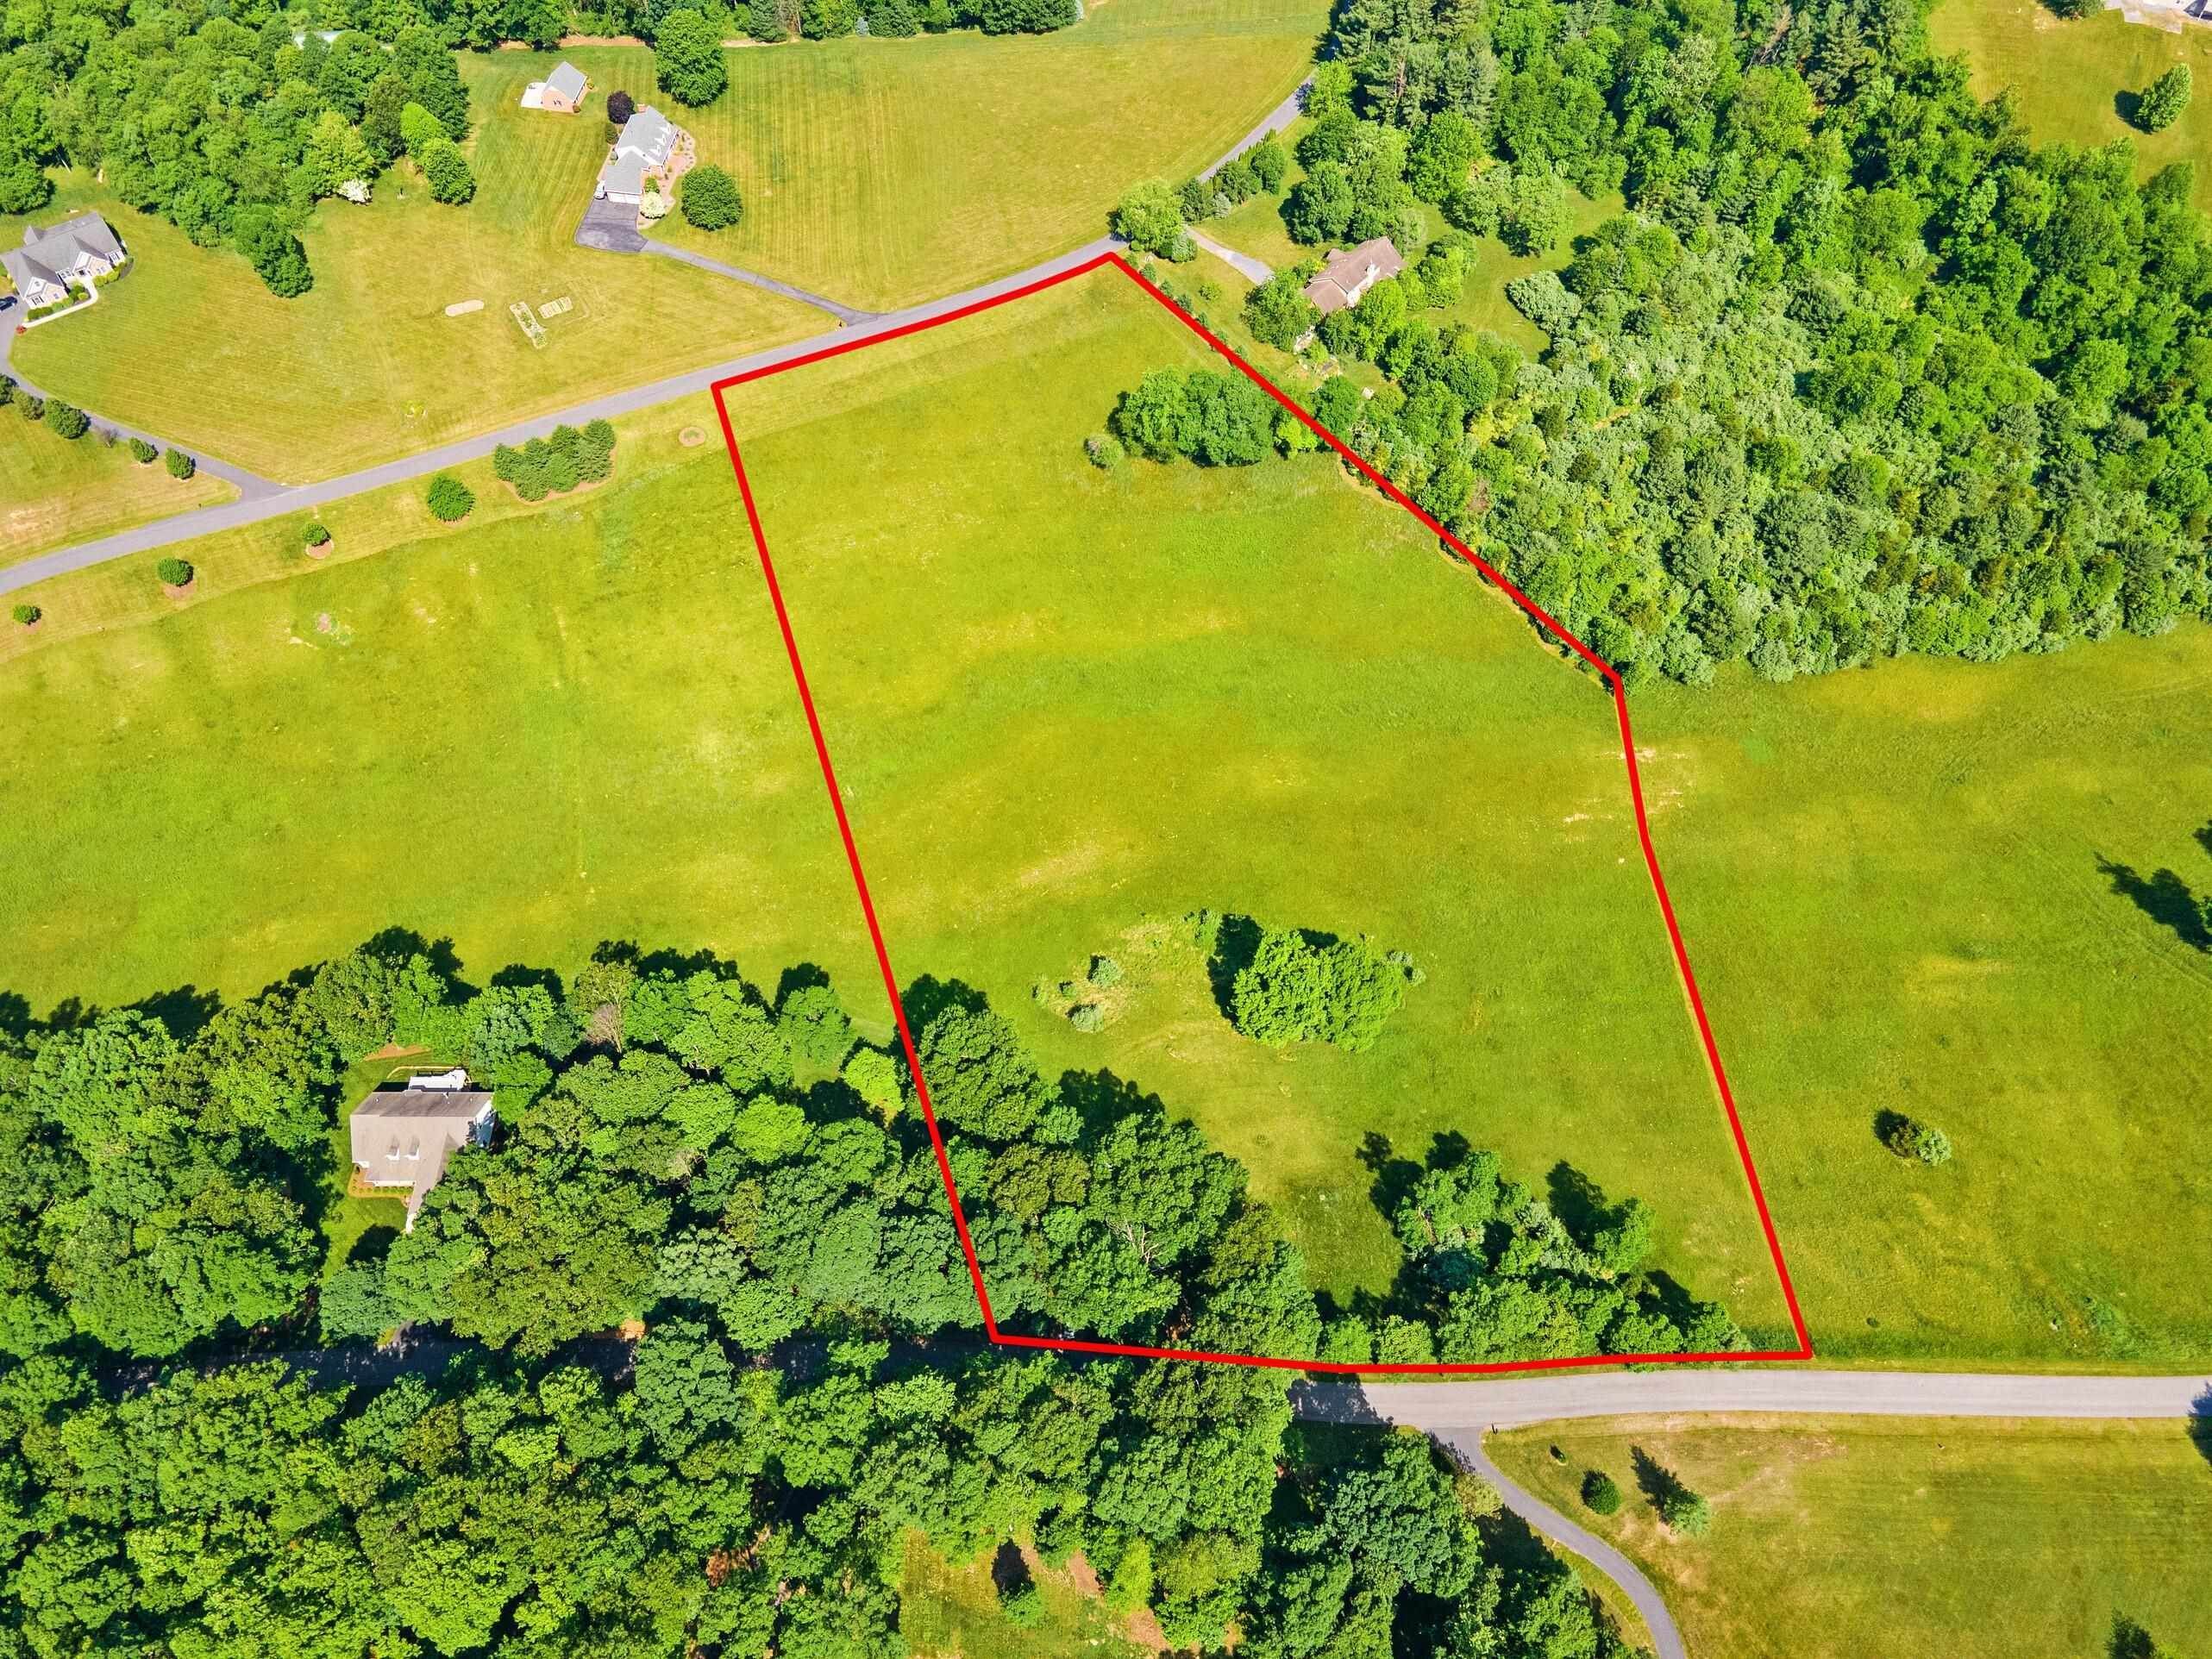 Land for Sale at 34A1 5 1 12 LIME KILN Road Churchville, Virginia 24421 United States